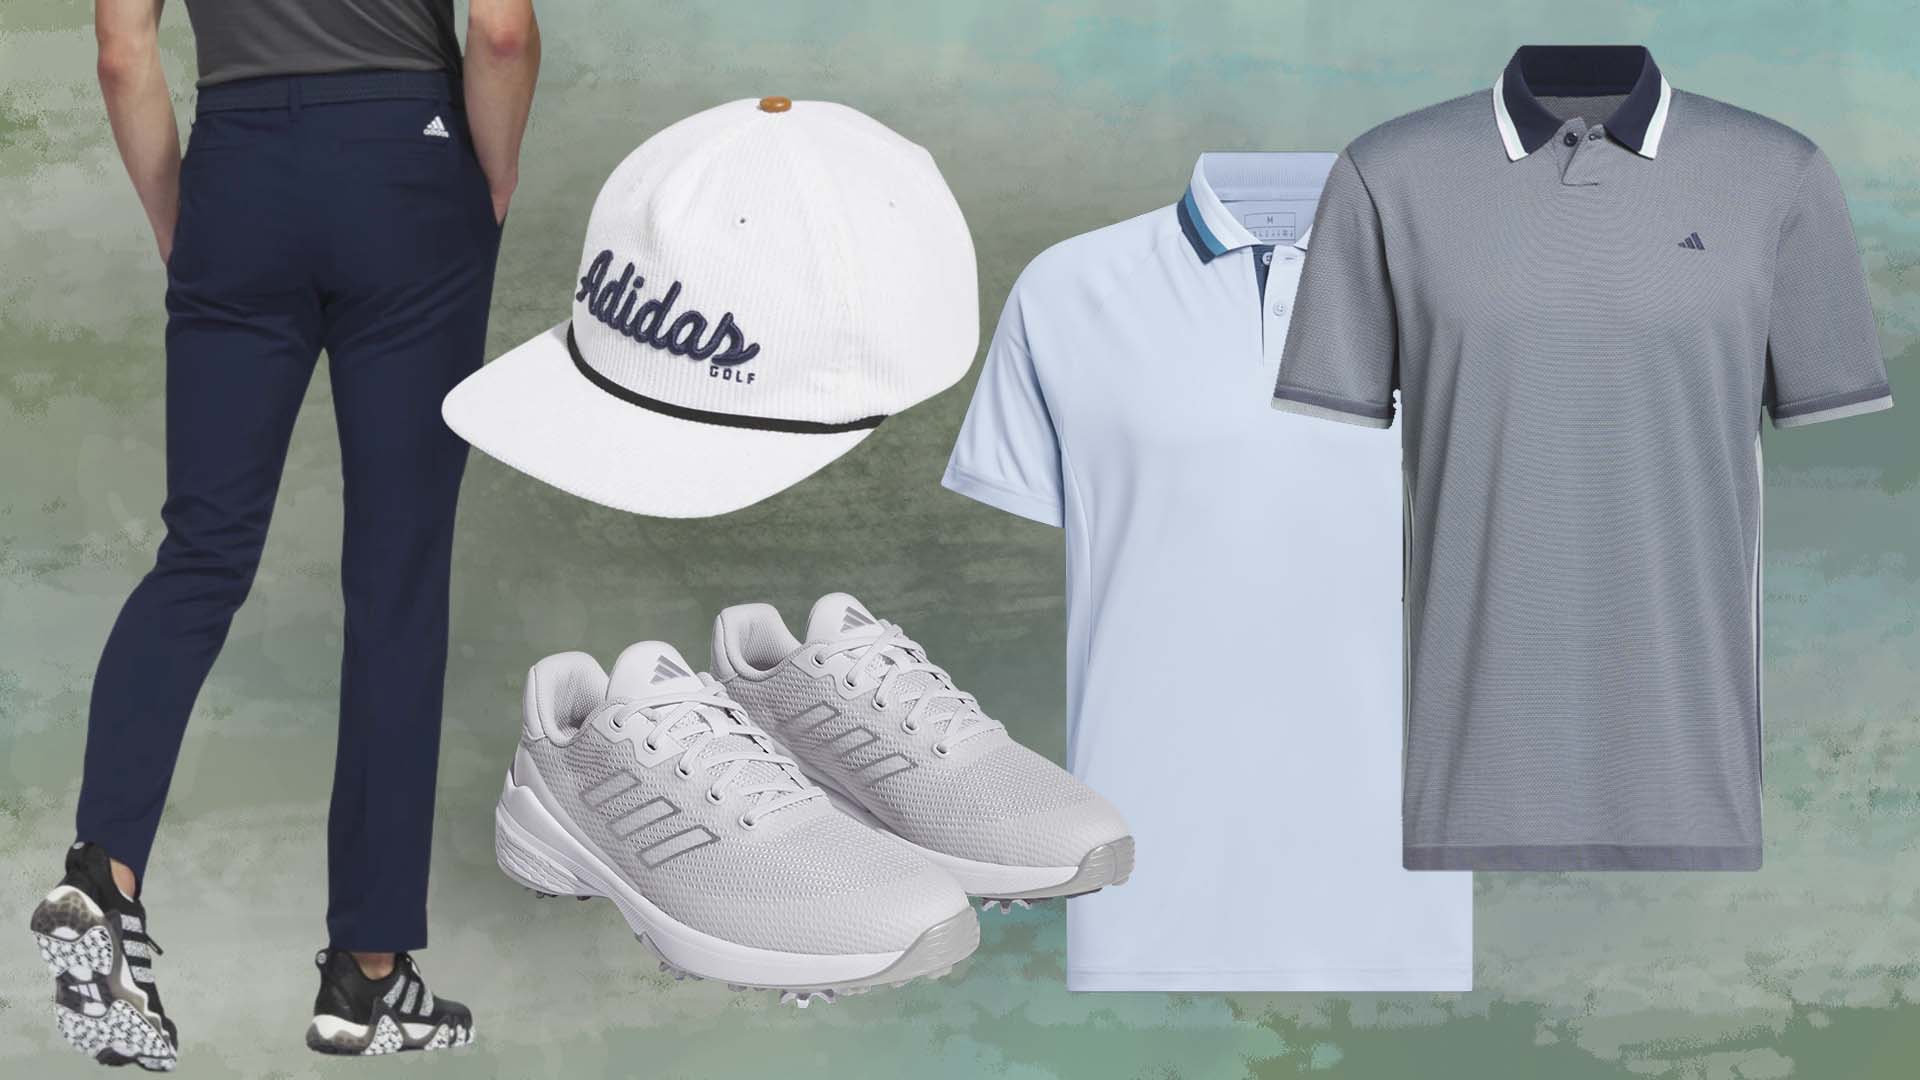 Adidas golf outfit